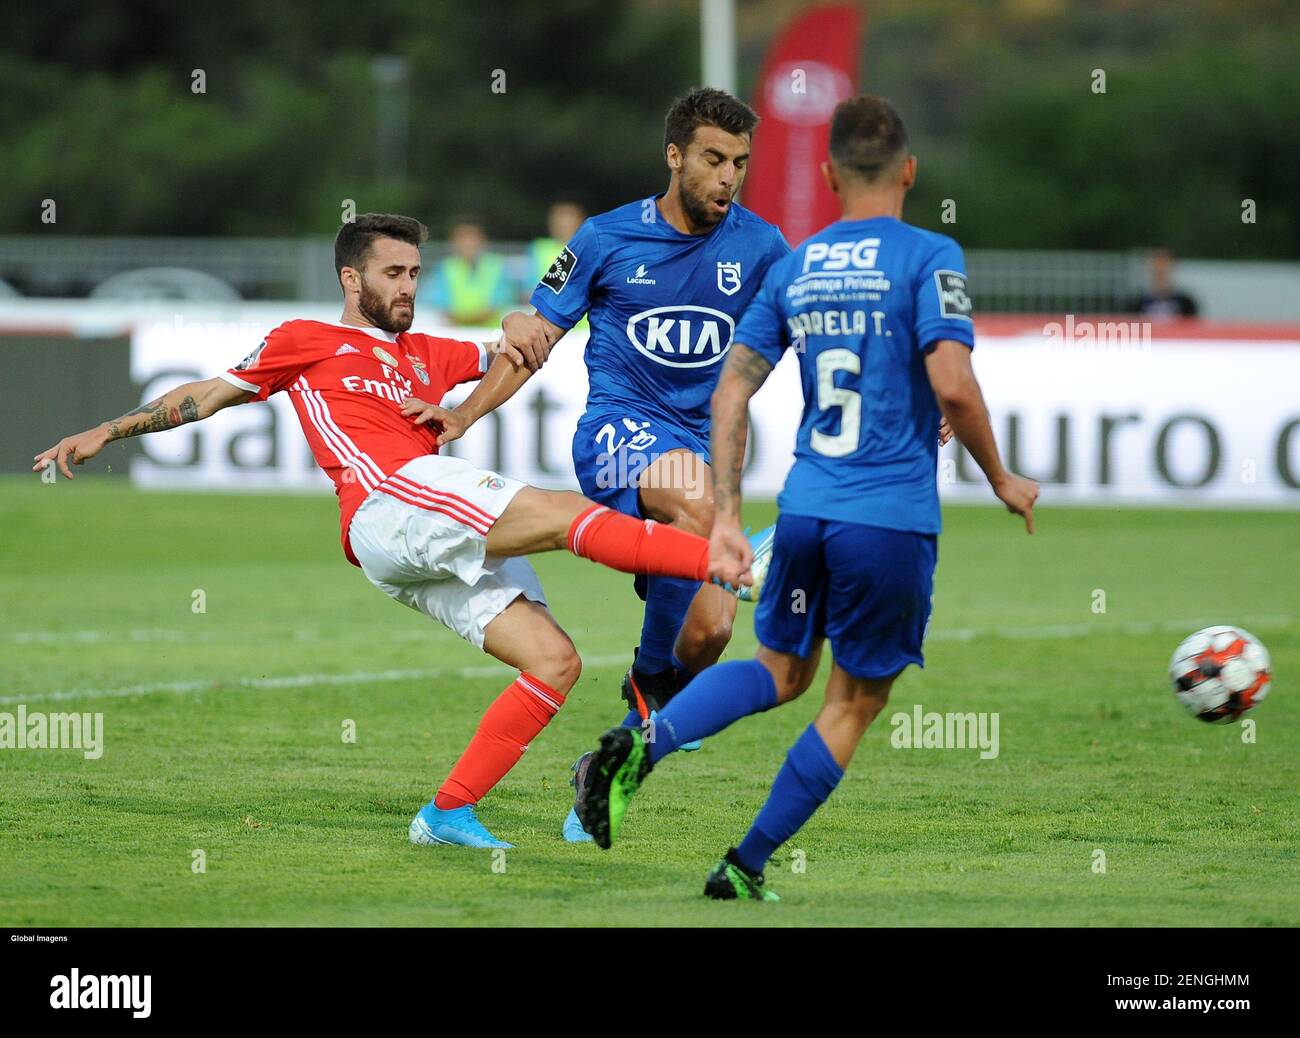 Oeiras 08 17 2019 Belenenses Sad Hosted Sport Lisboa E Benfica Tonight At Jamor Stadium In A Match Counting For The Second League Matchday 2019 20 Rafa A Lvaro Isidoro Global Images Sipa Usa [ 1038 x 1300 Pixel ]